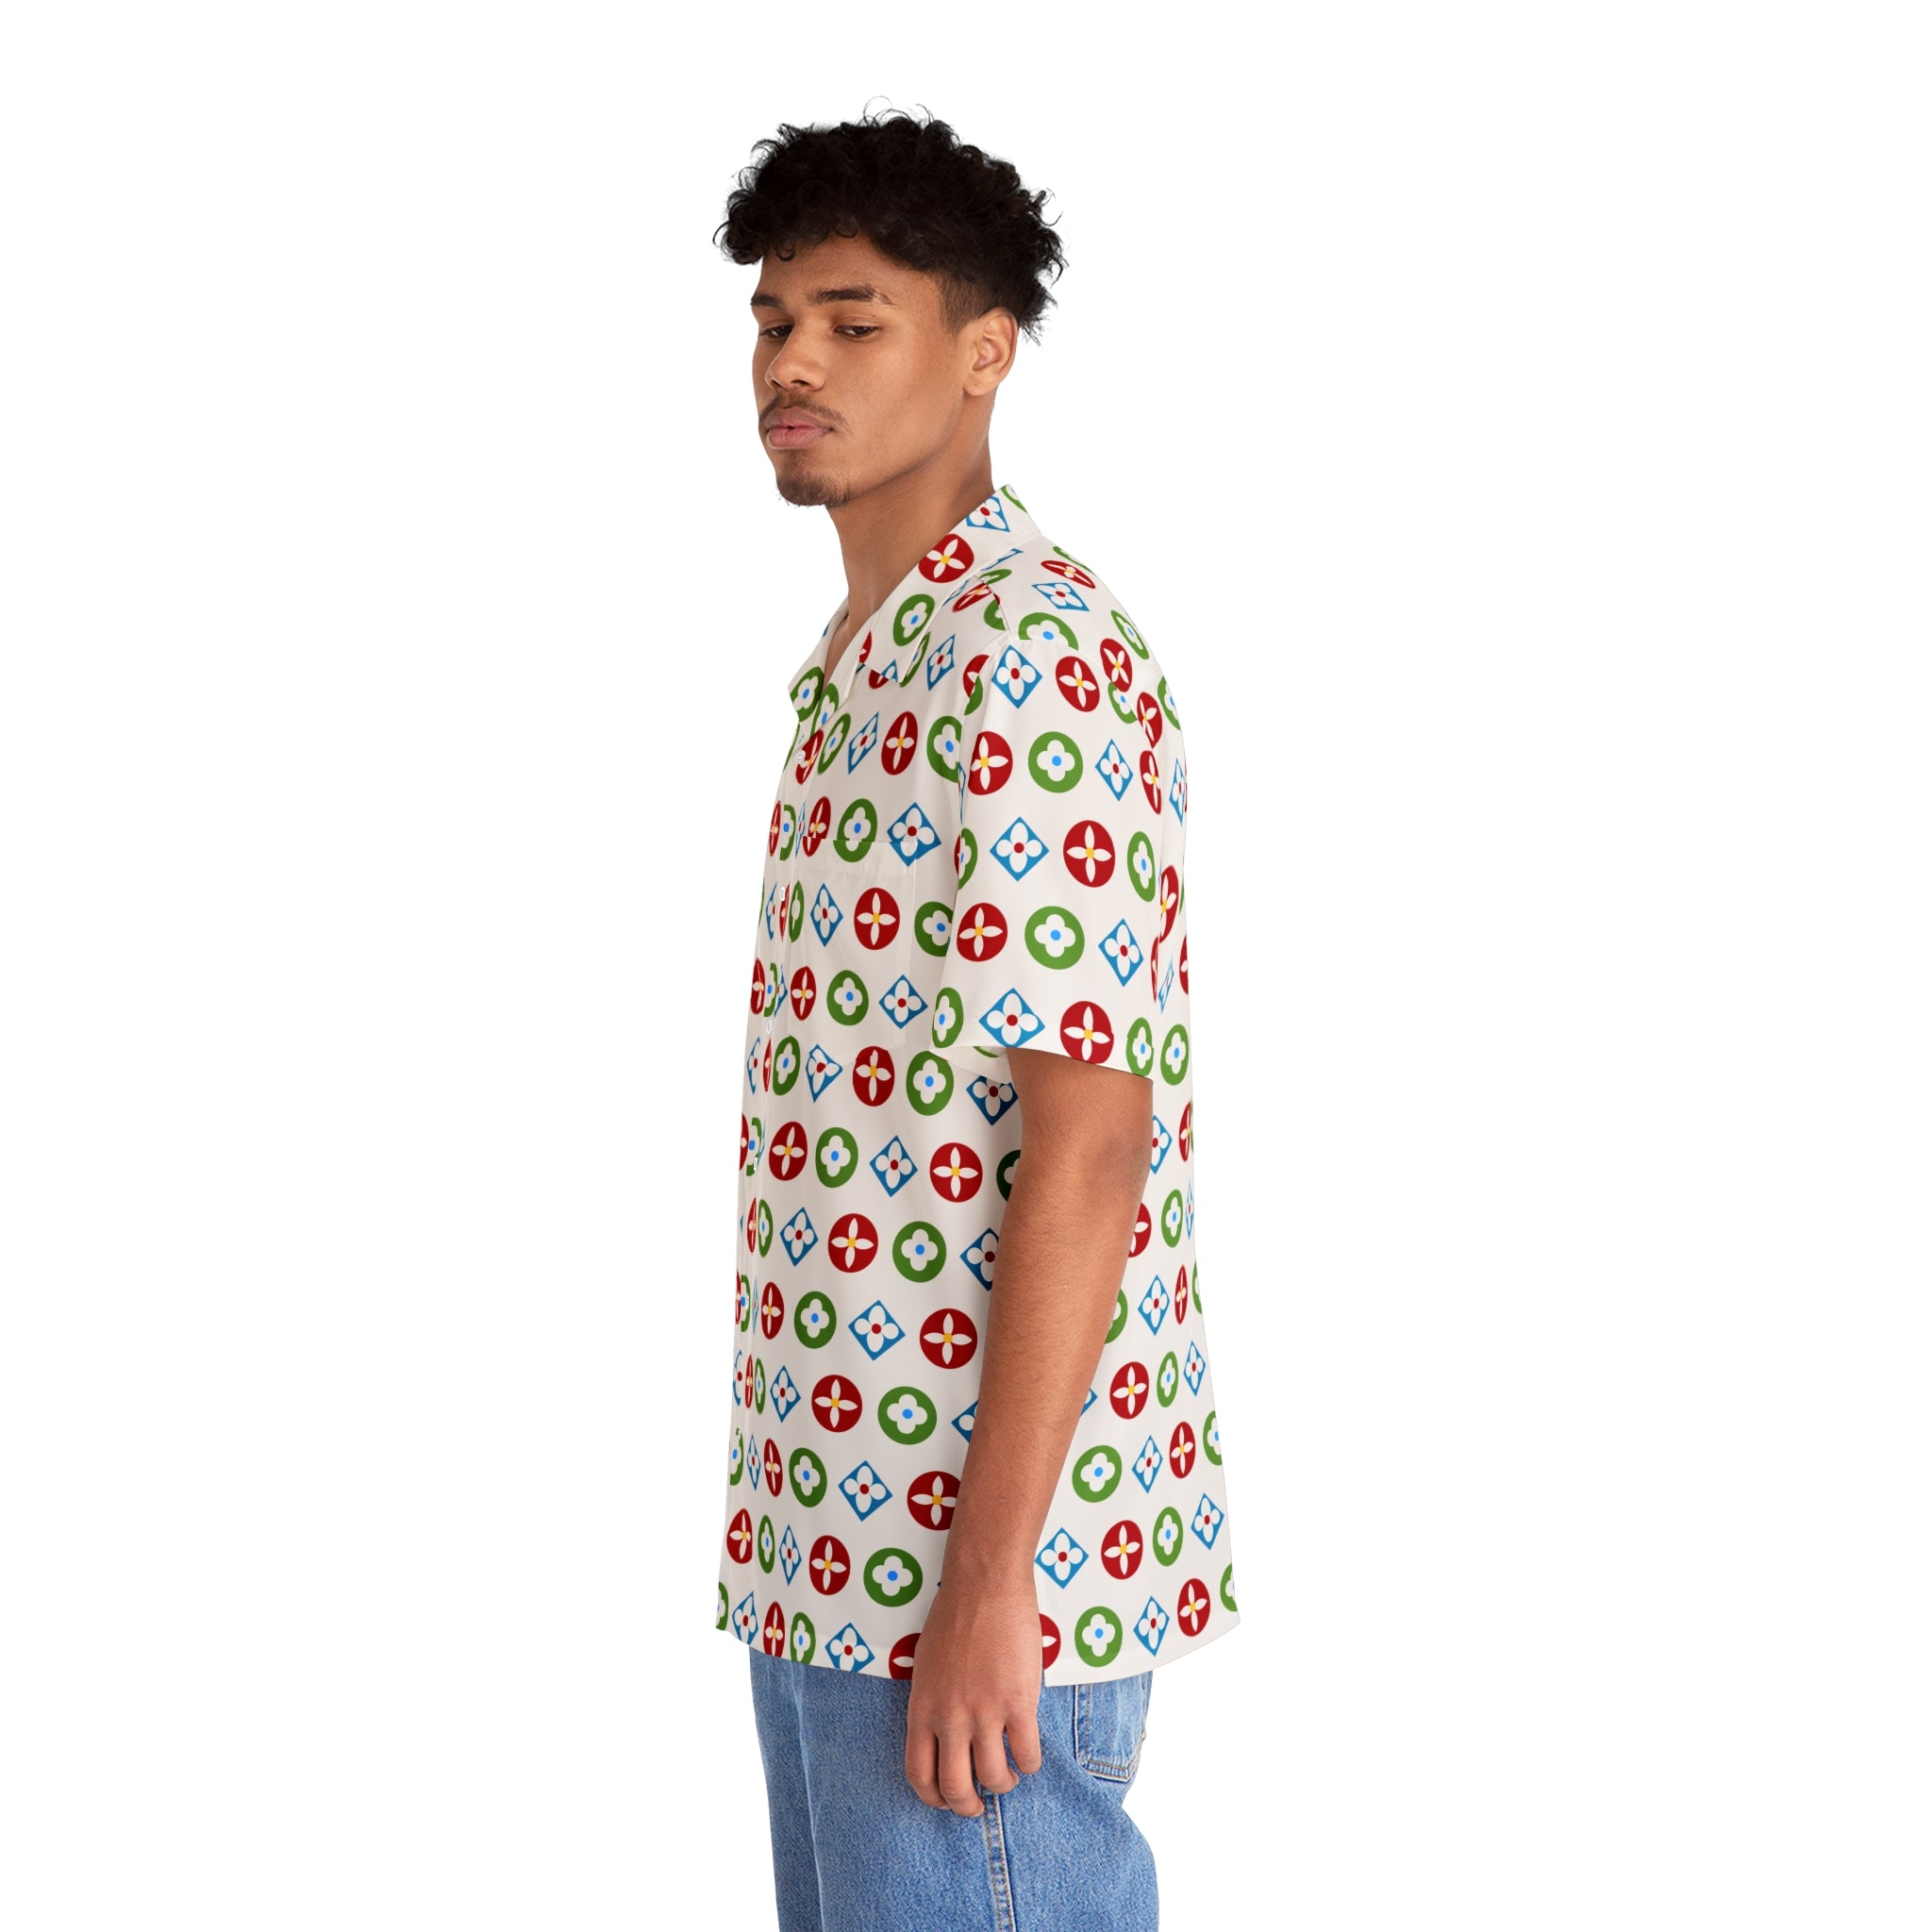  Groove Collection Trilogy of Icons Pattern (Red, Green, Blue) White Unisex Gender Neutral Button Up Shirt, Hawaiian Shirt Men's Shirts